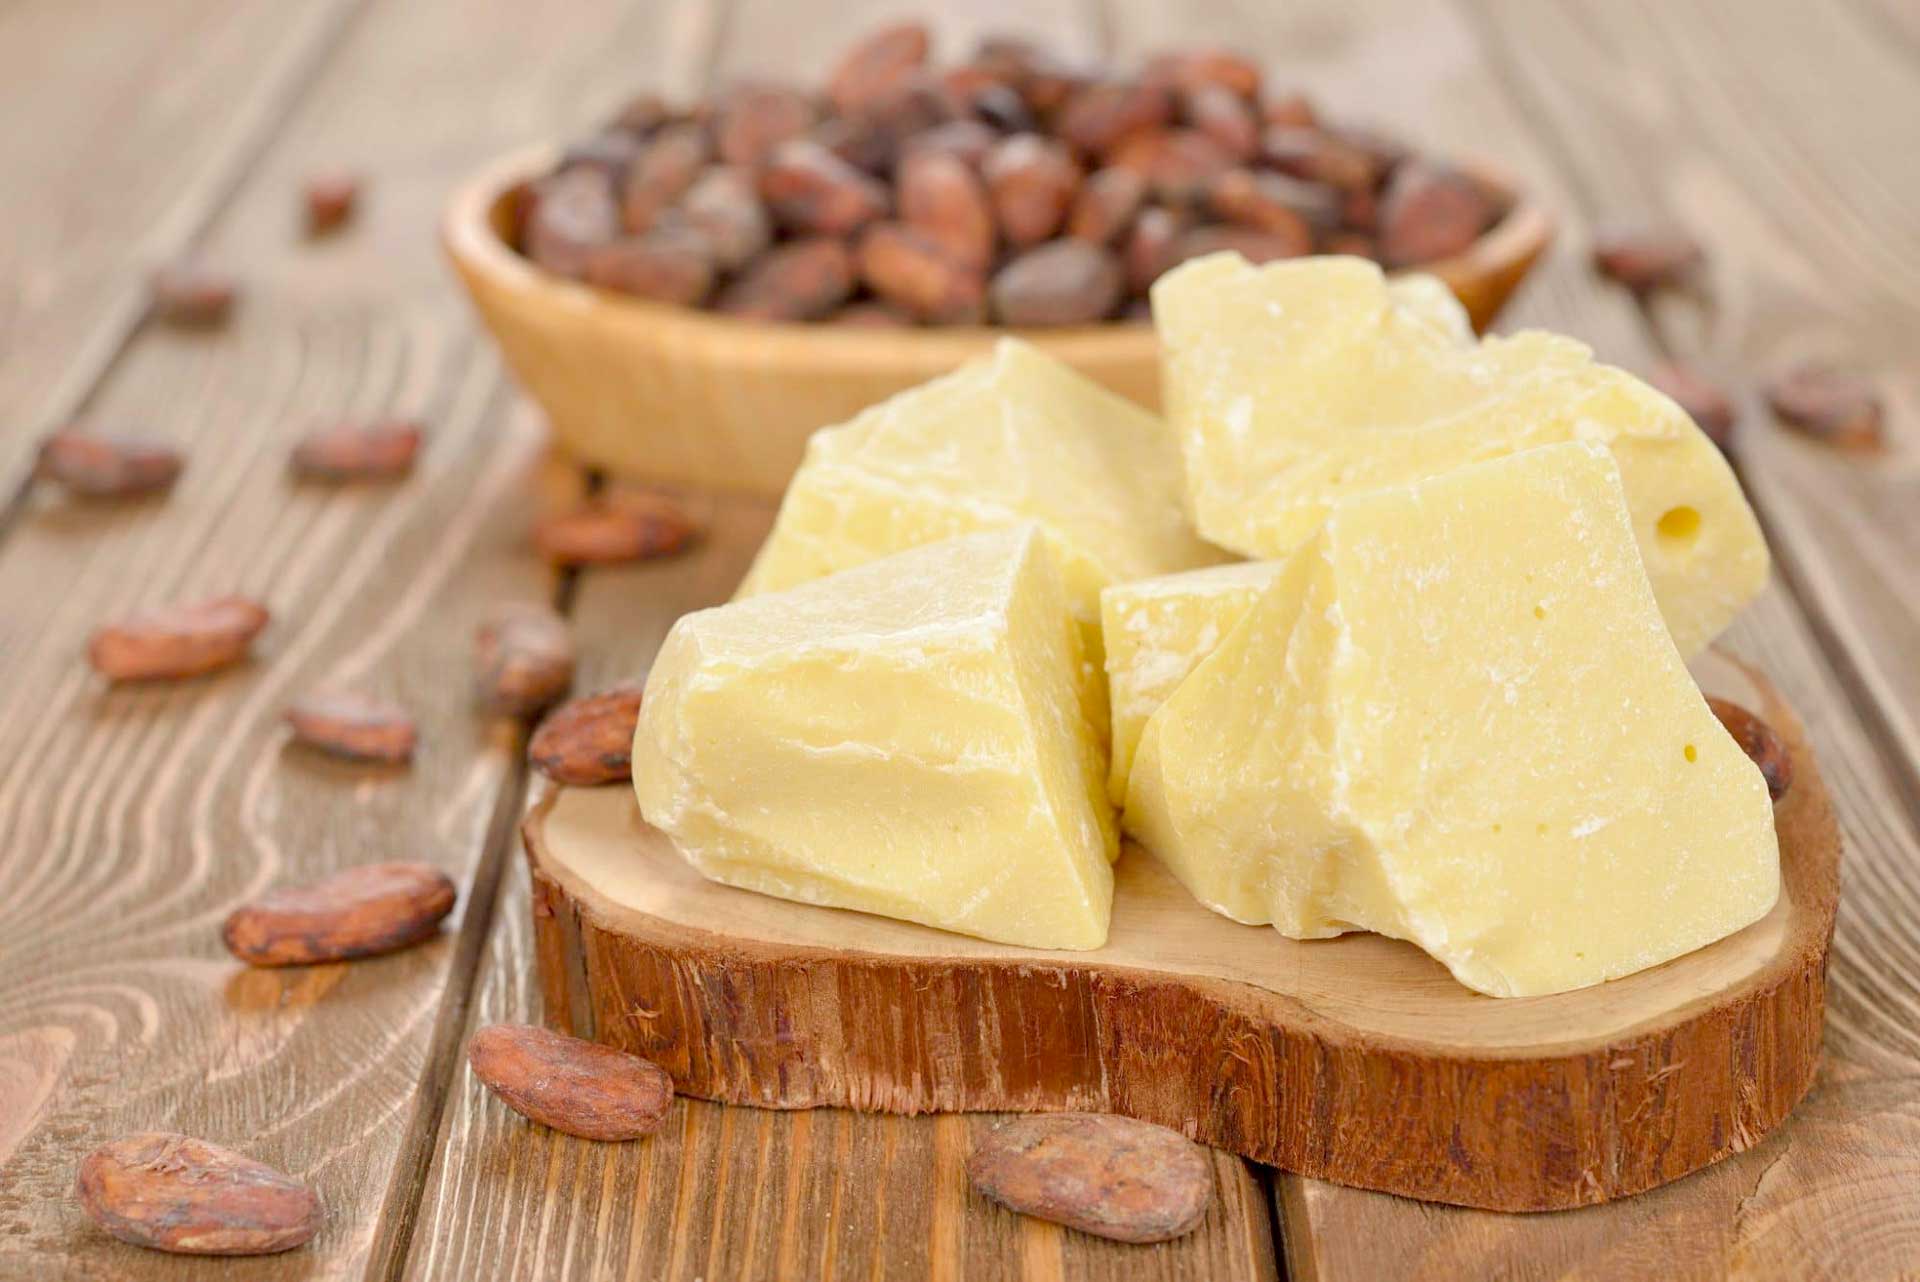 Some benefits of Cocoa Butter